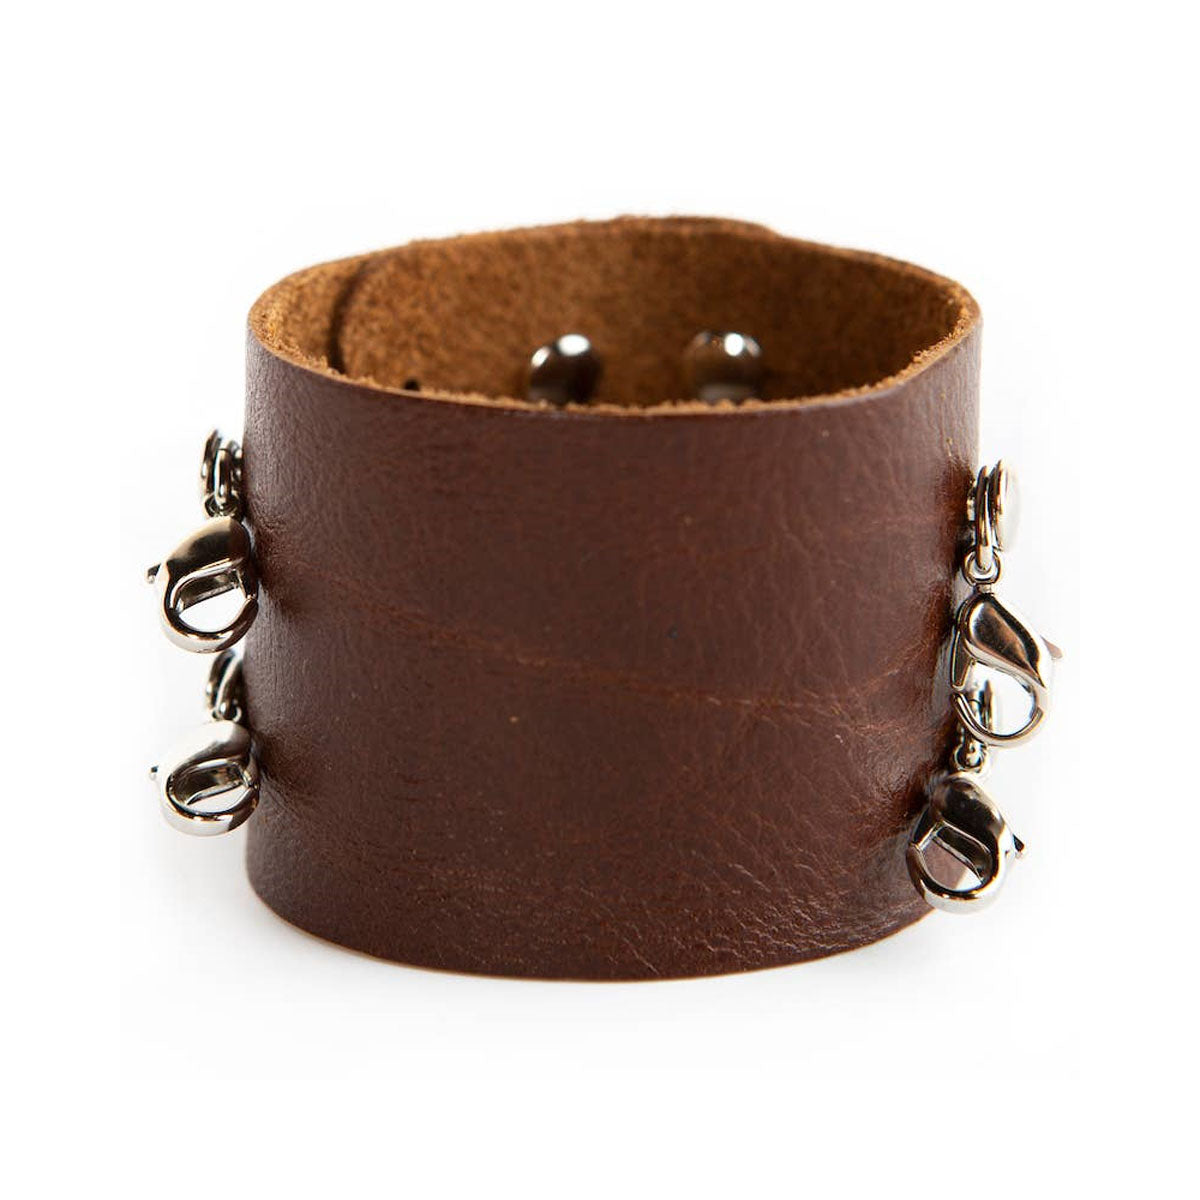 Leather Bracelet Leather Wristband Wide Leather Cuff Wristband